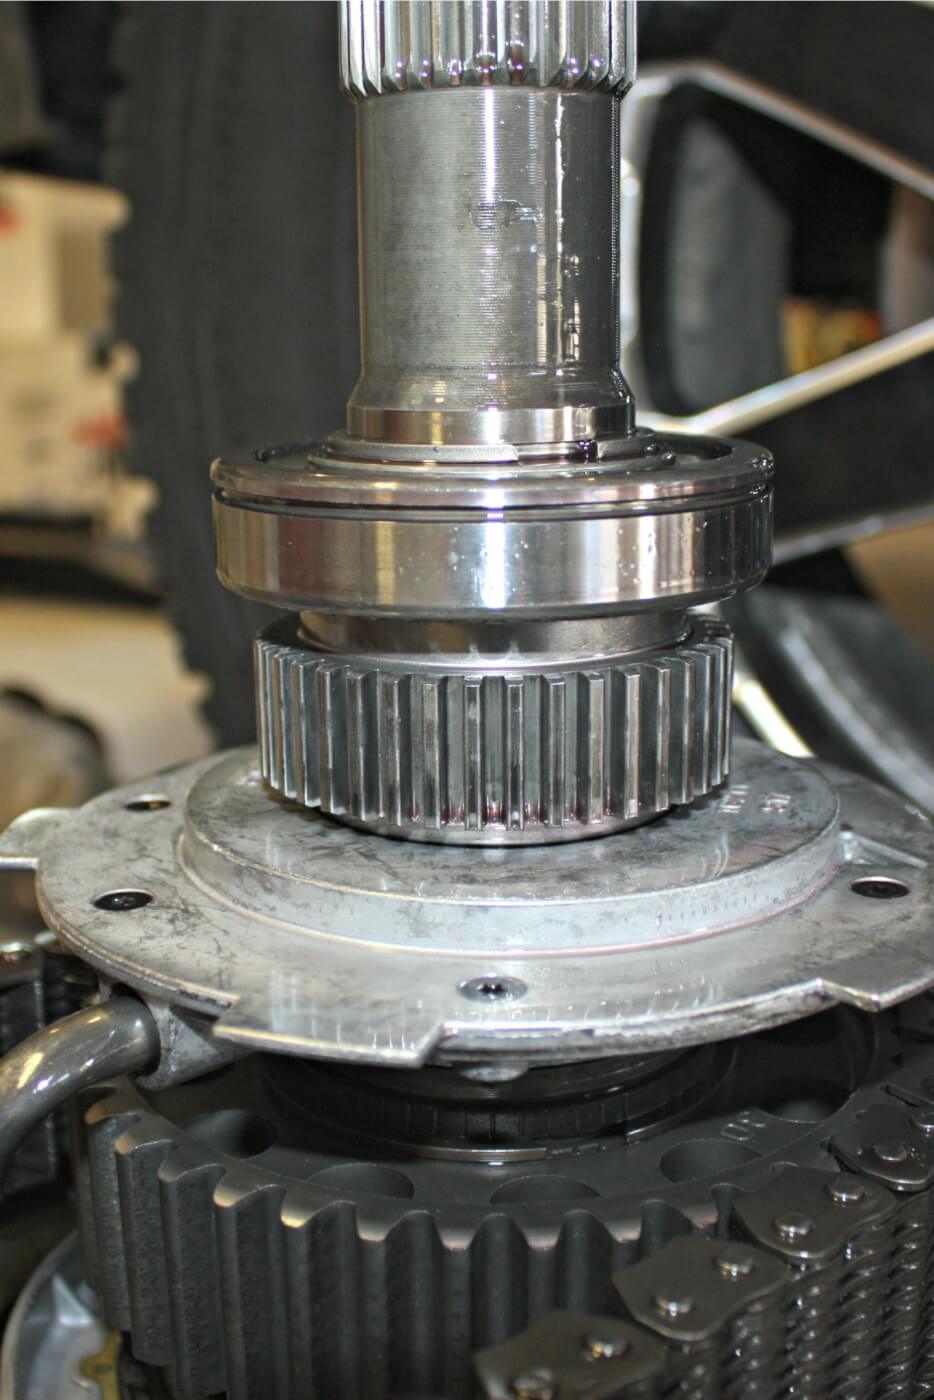 17. Pay attention to the stack-up position of the snap ring, bearing and gear as their positioning will need to be identical when it goes back together. The groove in the bearing will need to face rearward, as this is where the rear case snap ring will seat to hold everything together.